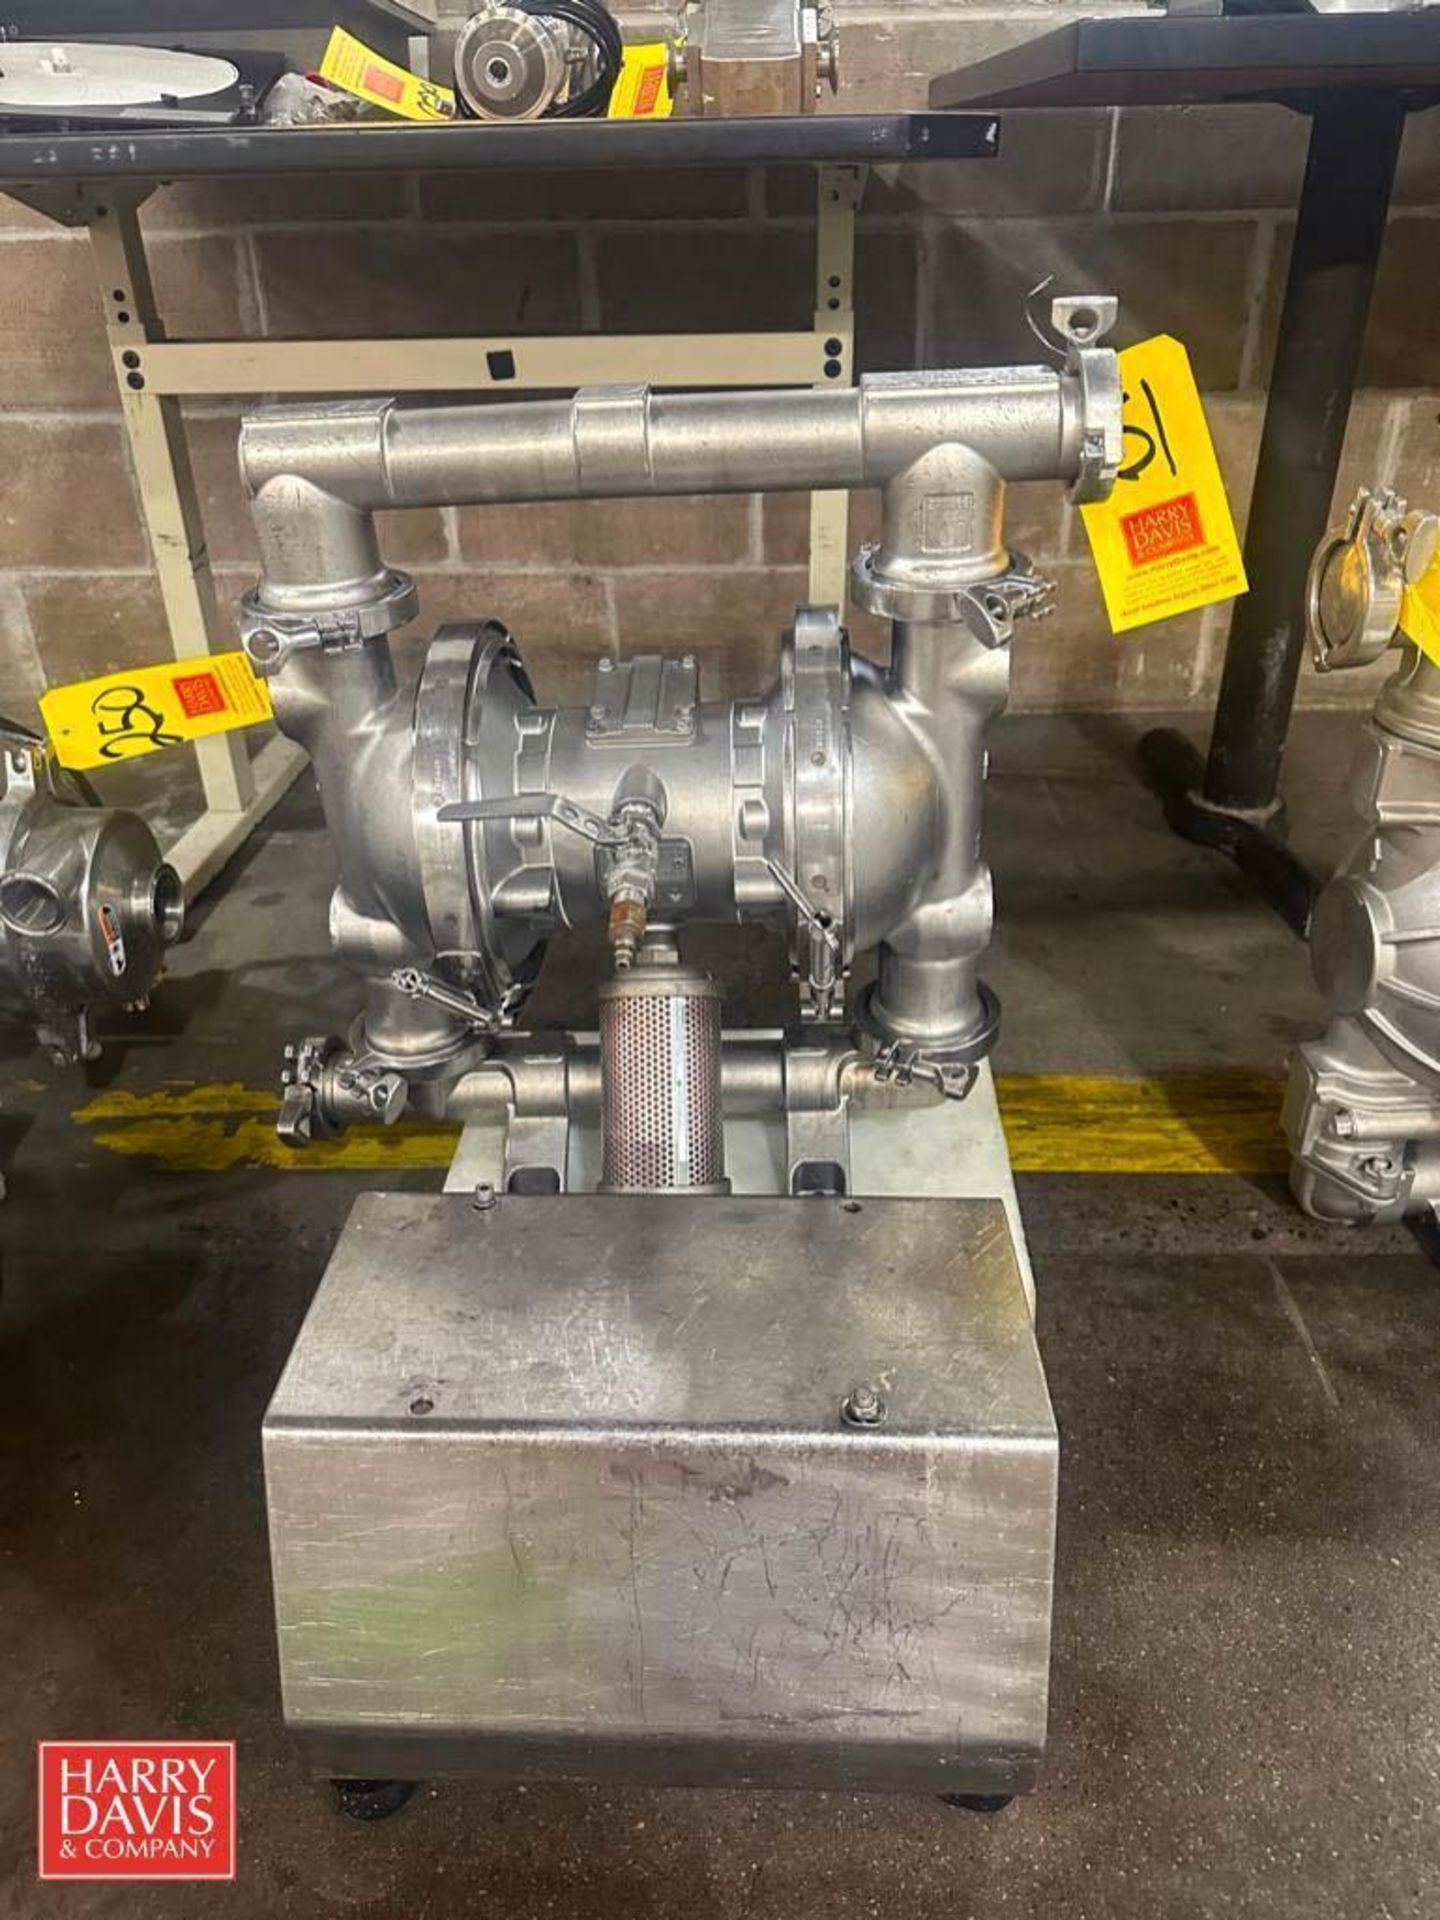 S/S Diaphragm Pump with Muffler: Mounted on S/S Base - Rigging Fee: $150